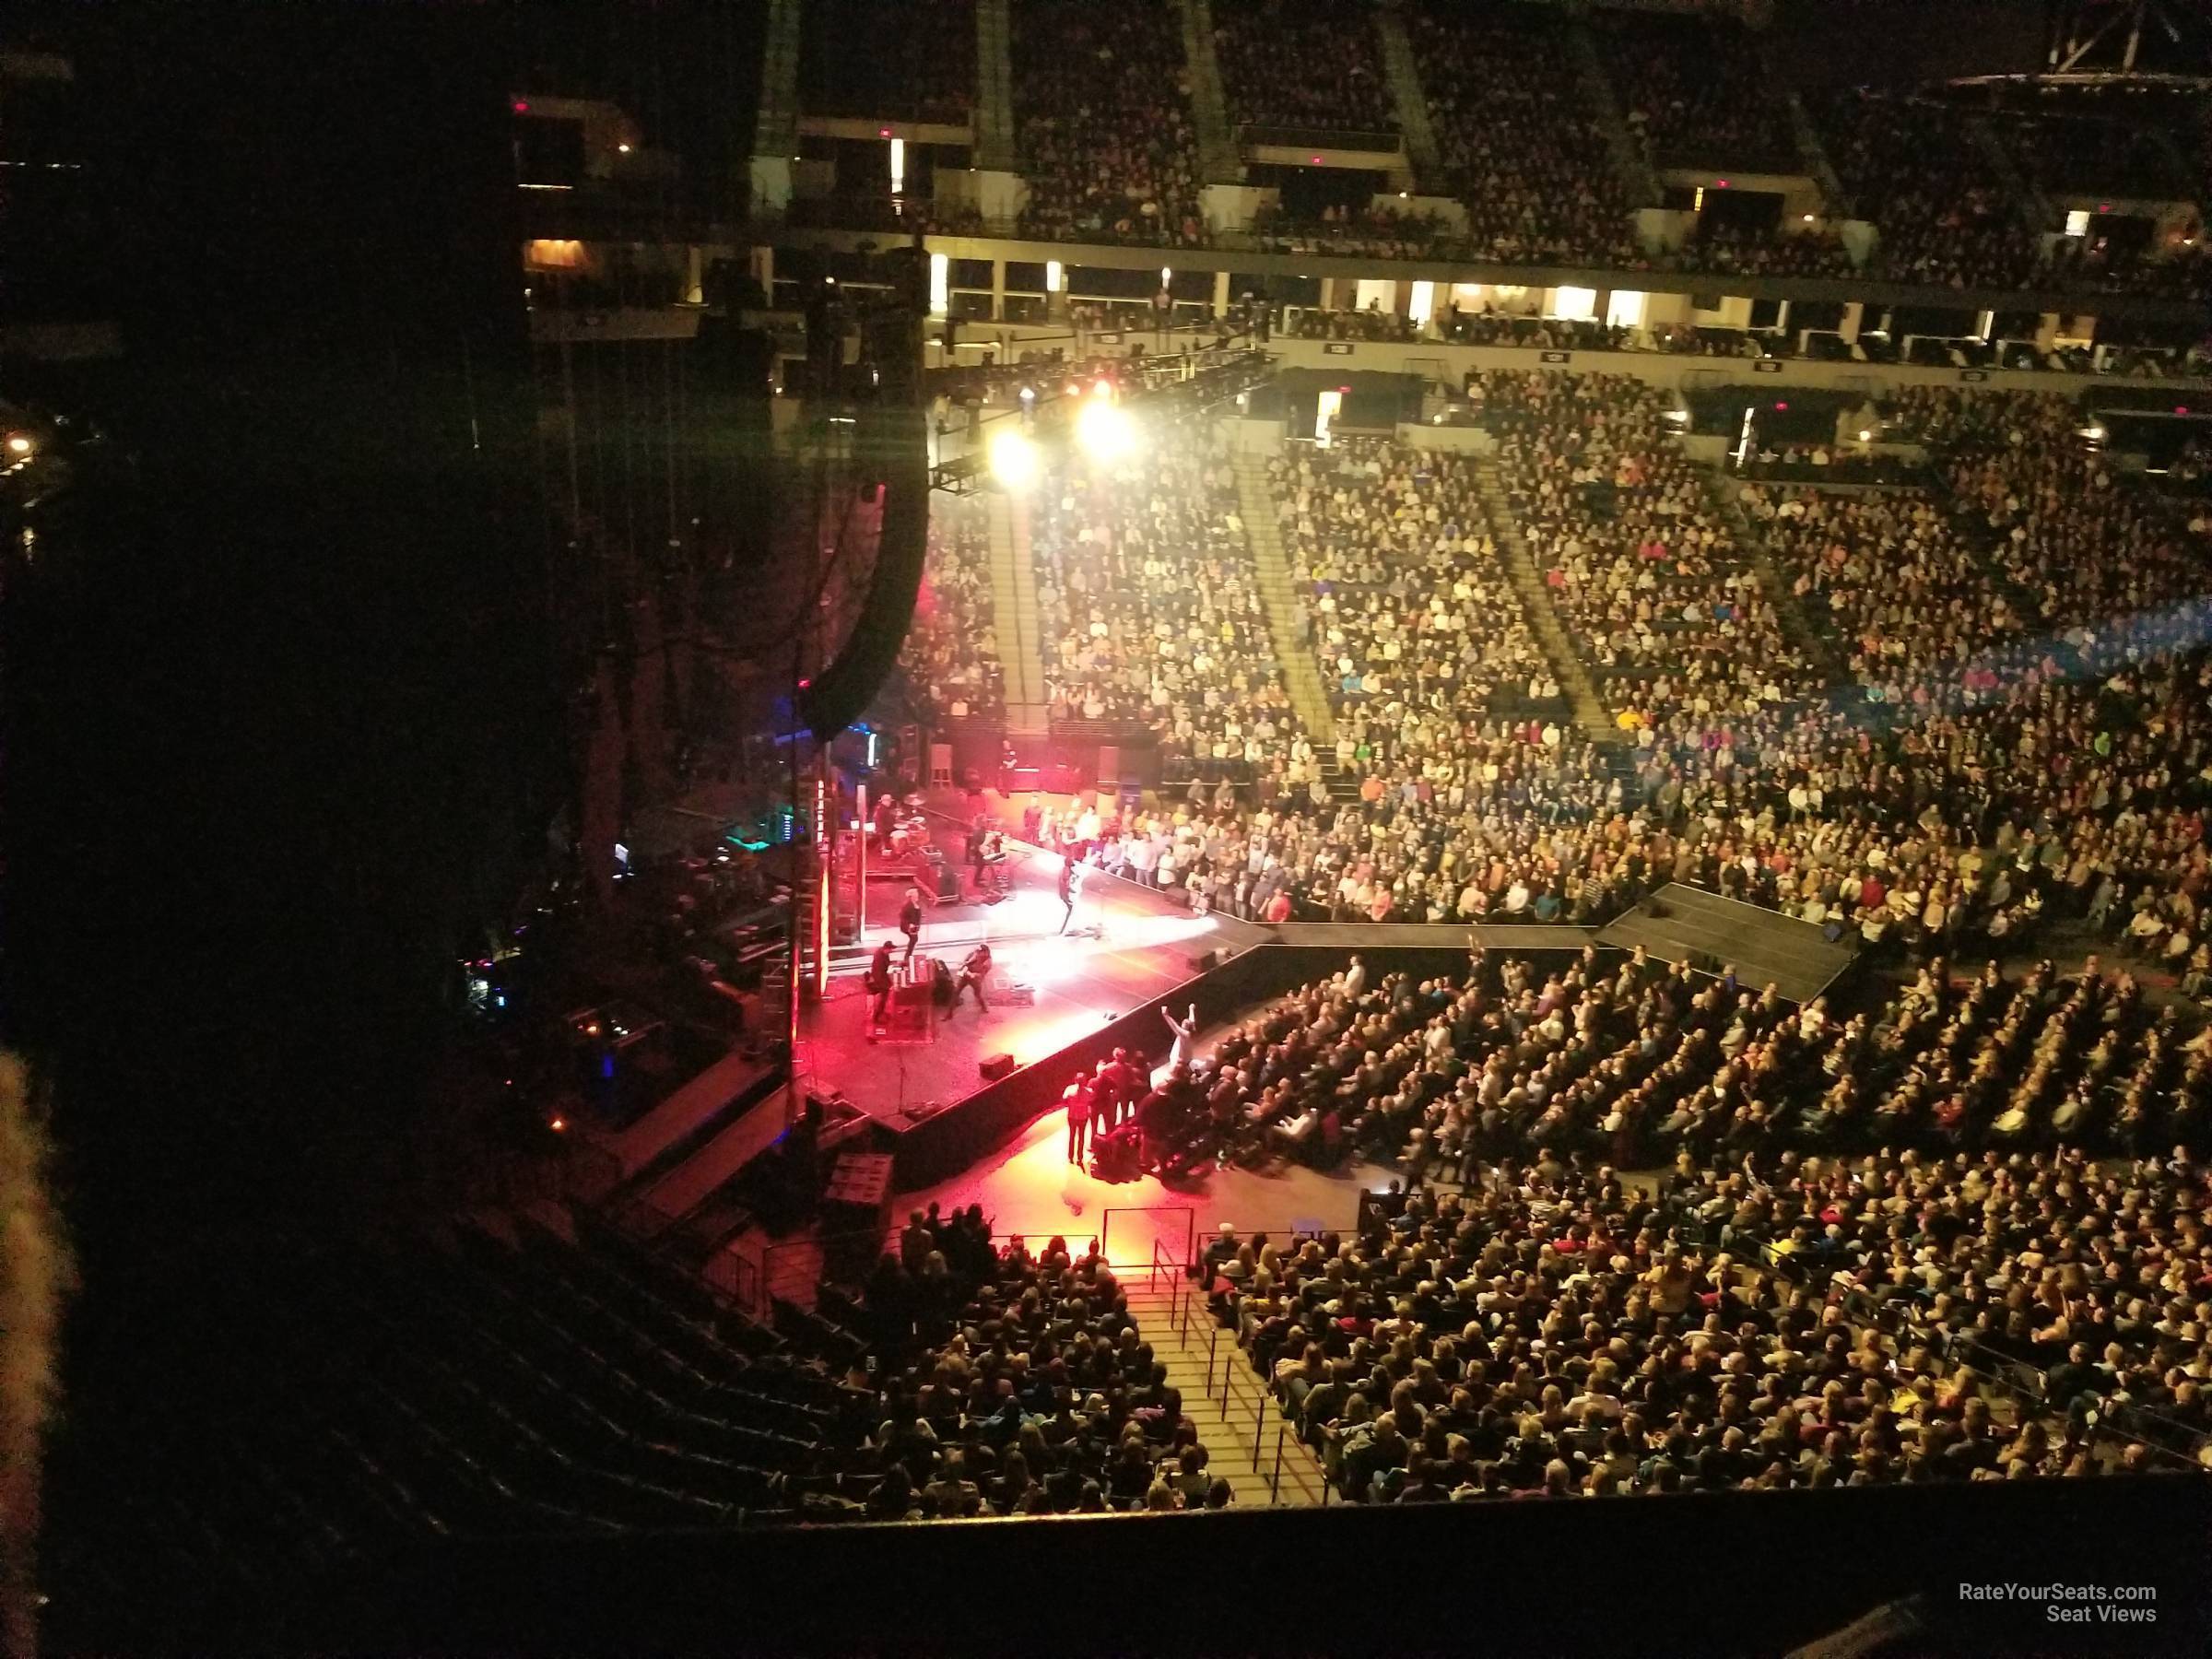 Section 214 at Target Center for Concerts - RateYourSeats.com